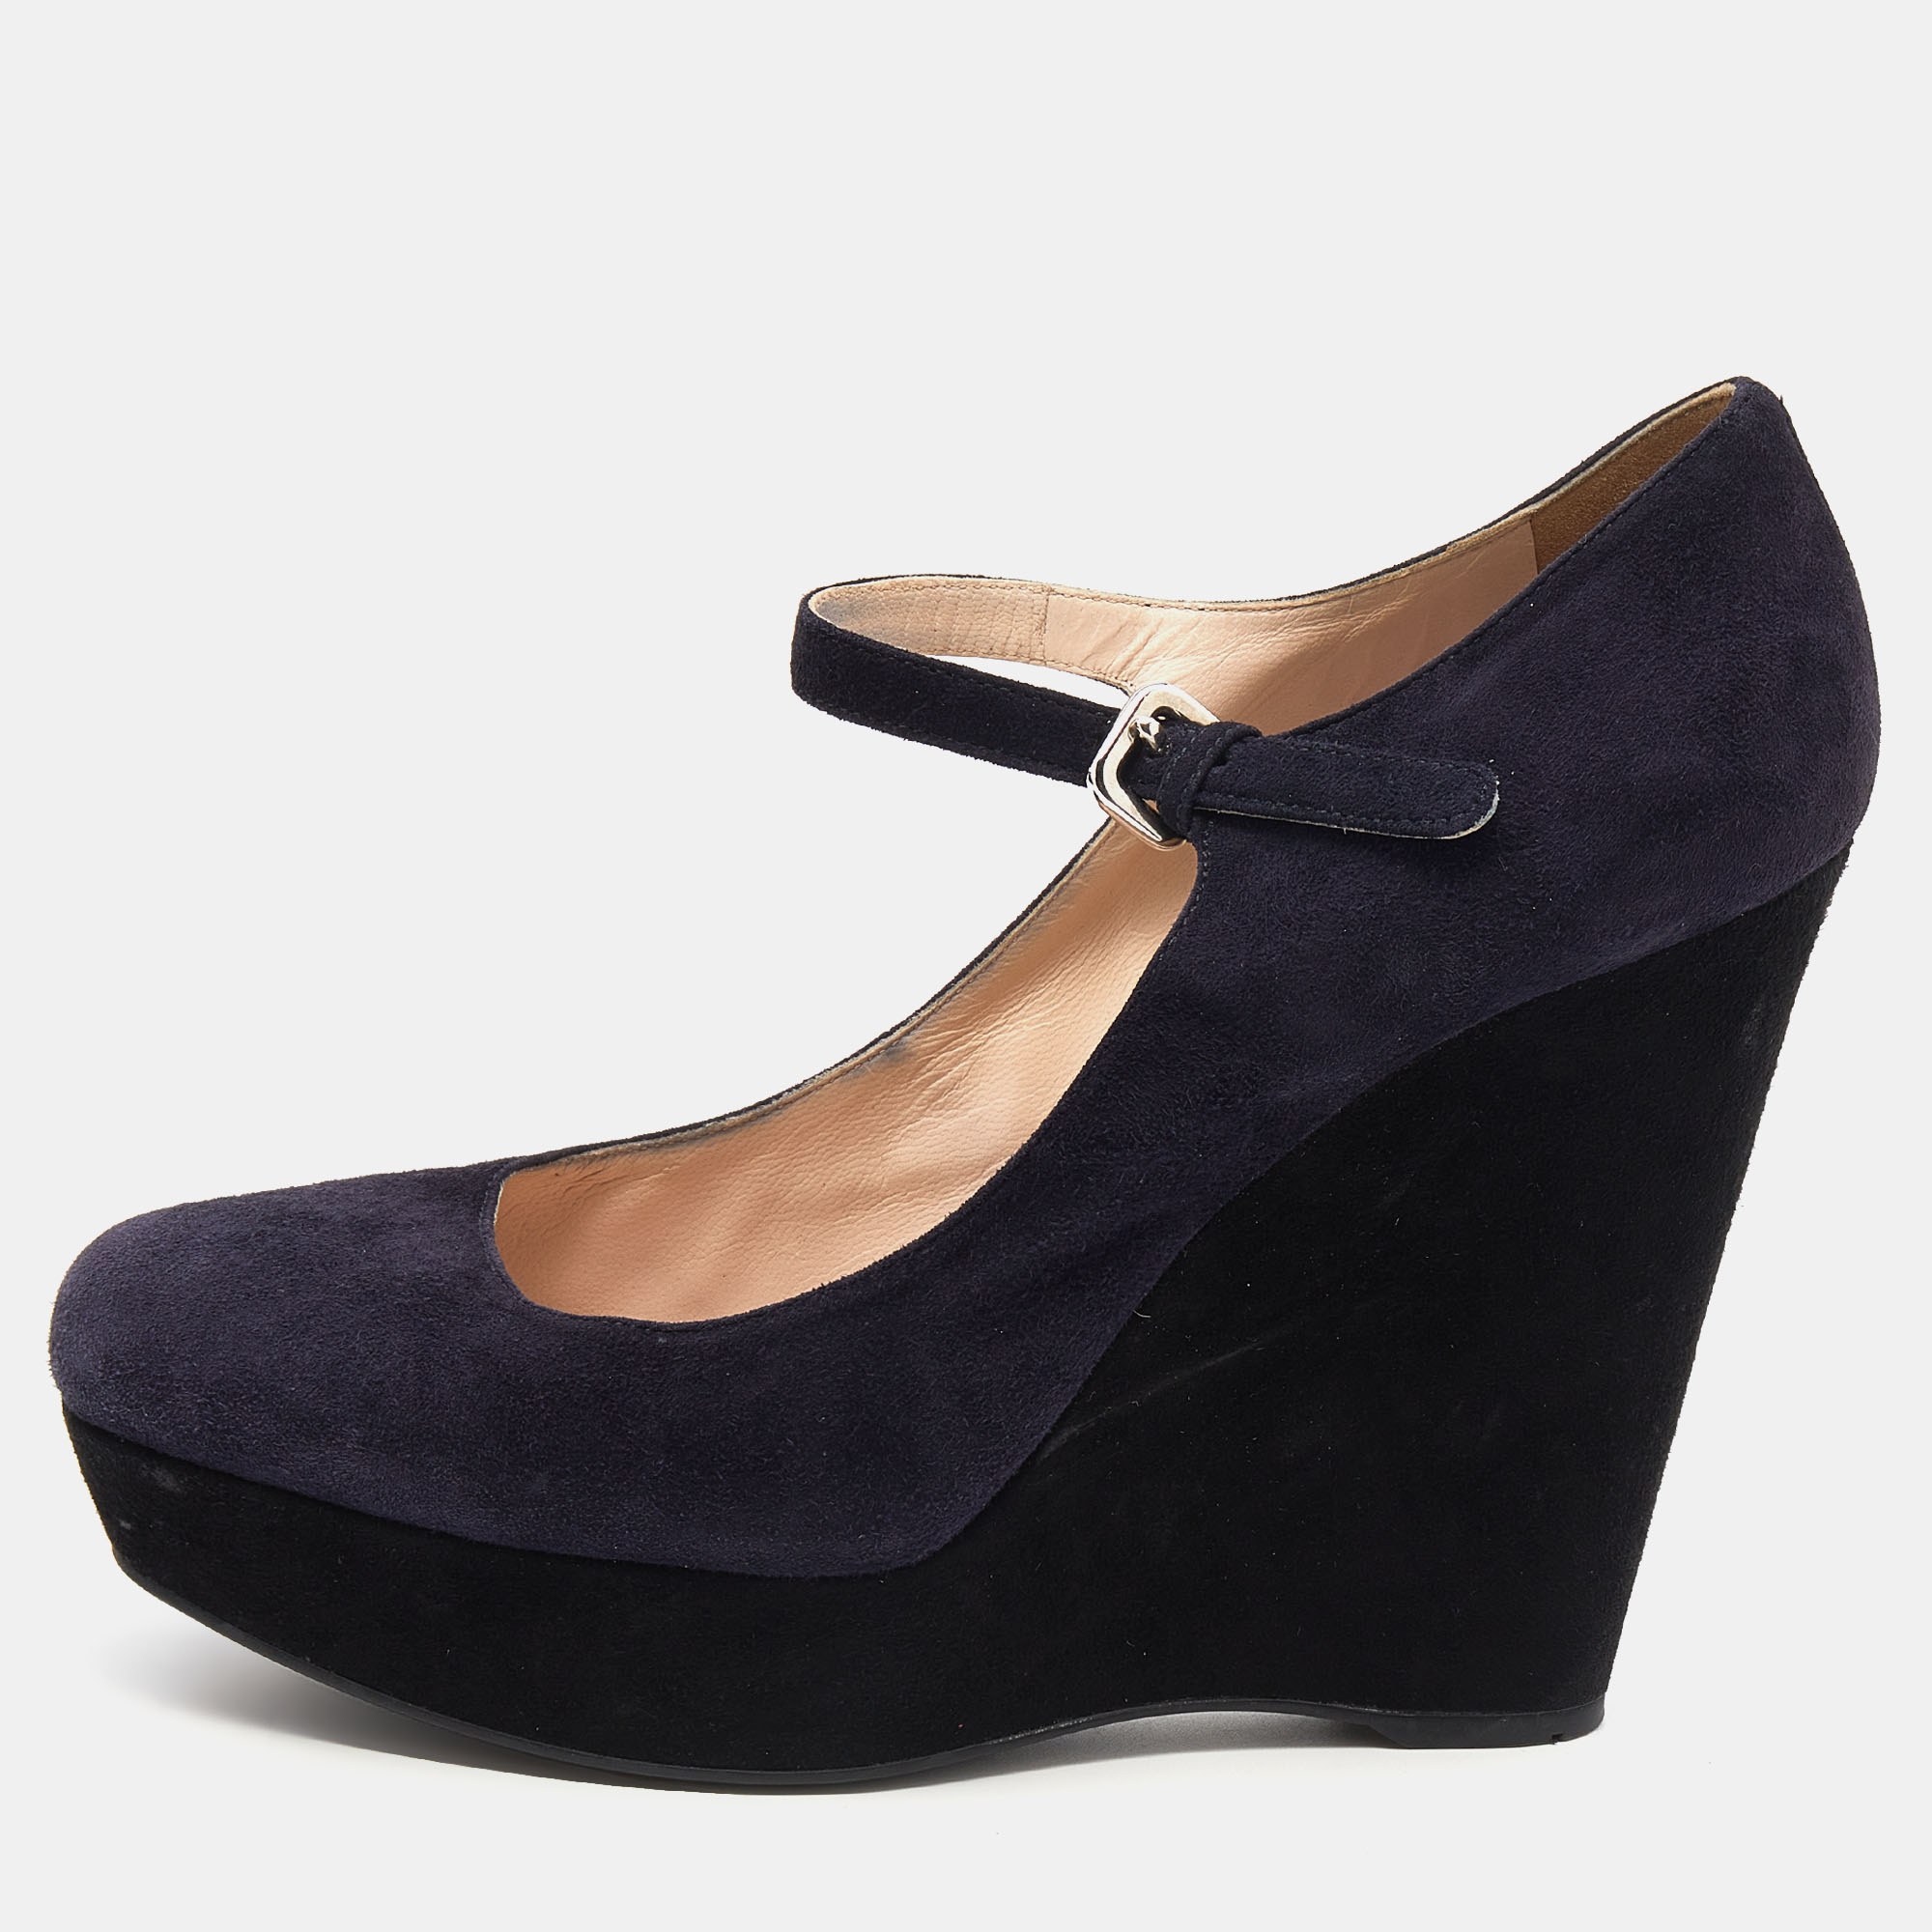 Work your magic while donning these beautiful pumps crafted from dark purple suede. Perfect for day to night looks this pair of Prada pumps matches well with flowy pleated dresses. It is complete with buckled closures and 11.5 cm wedge heels.